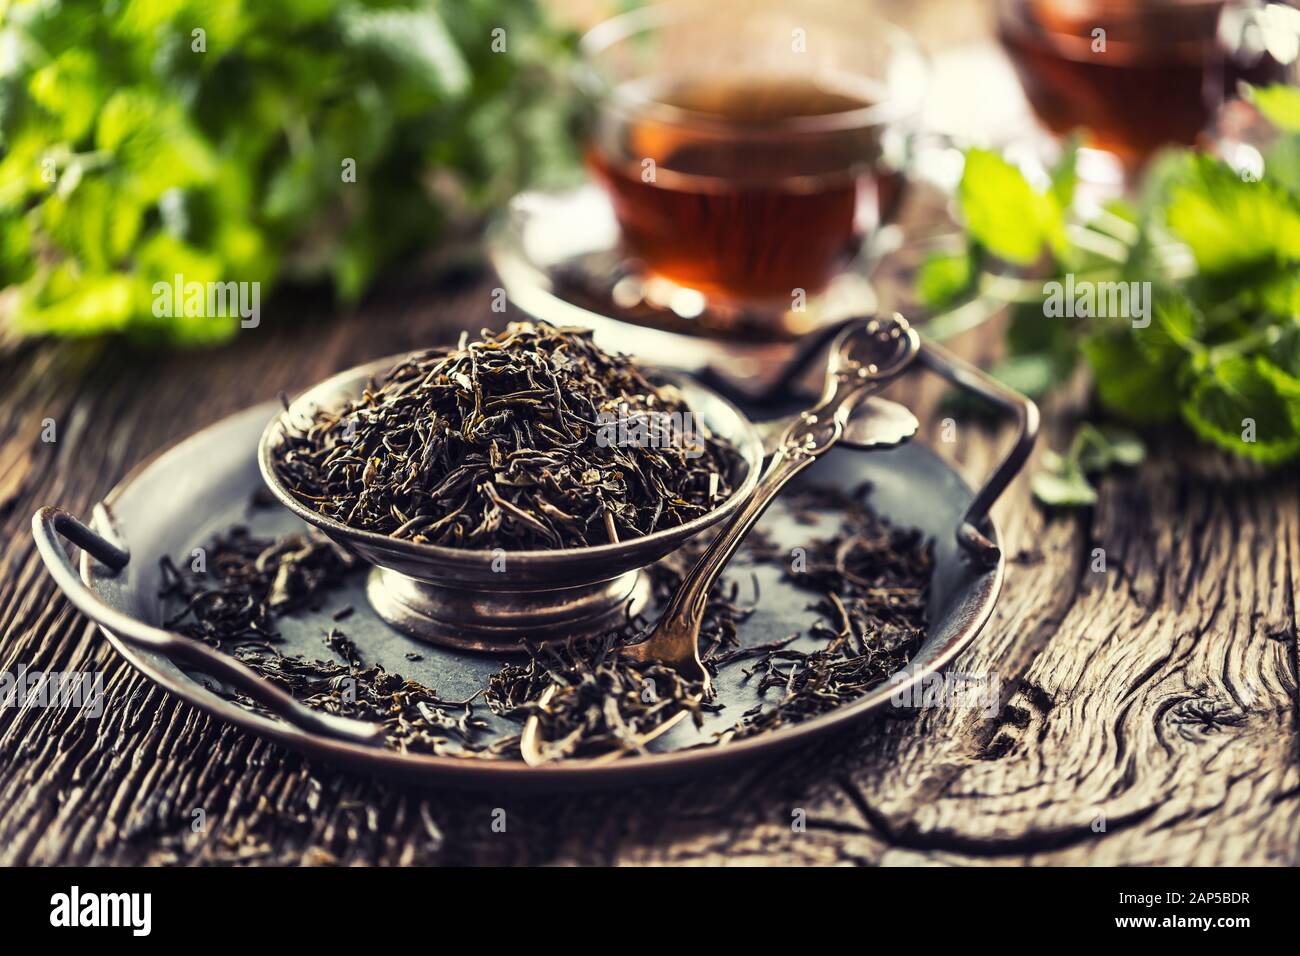 Dried tea leaves in bowl on rustic wooden table Stock Photo